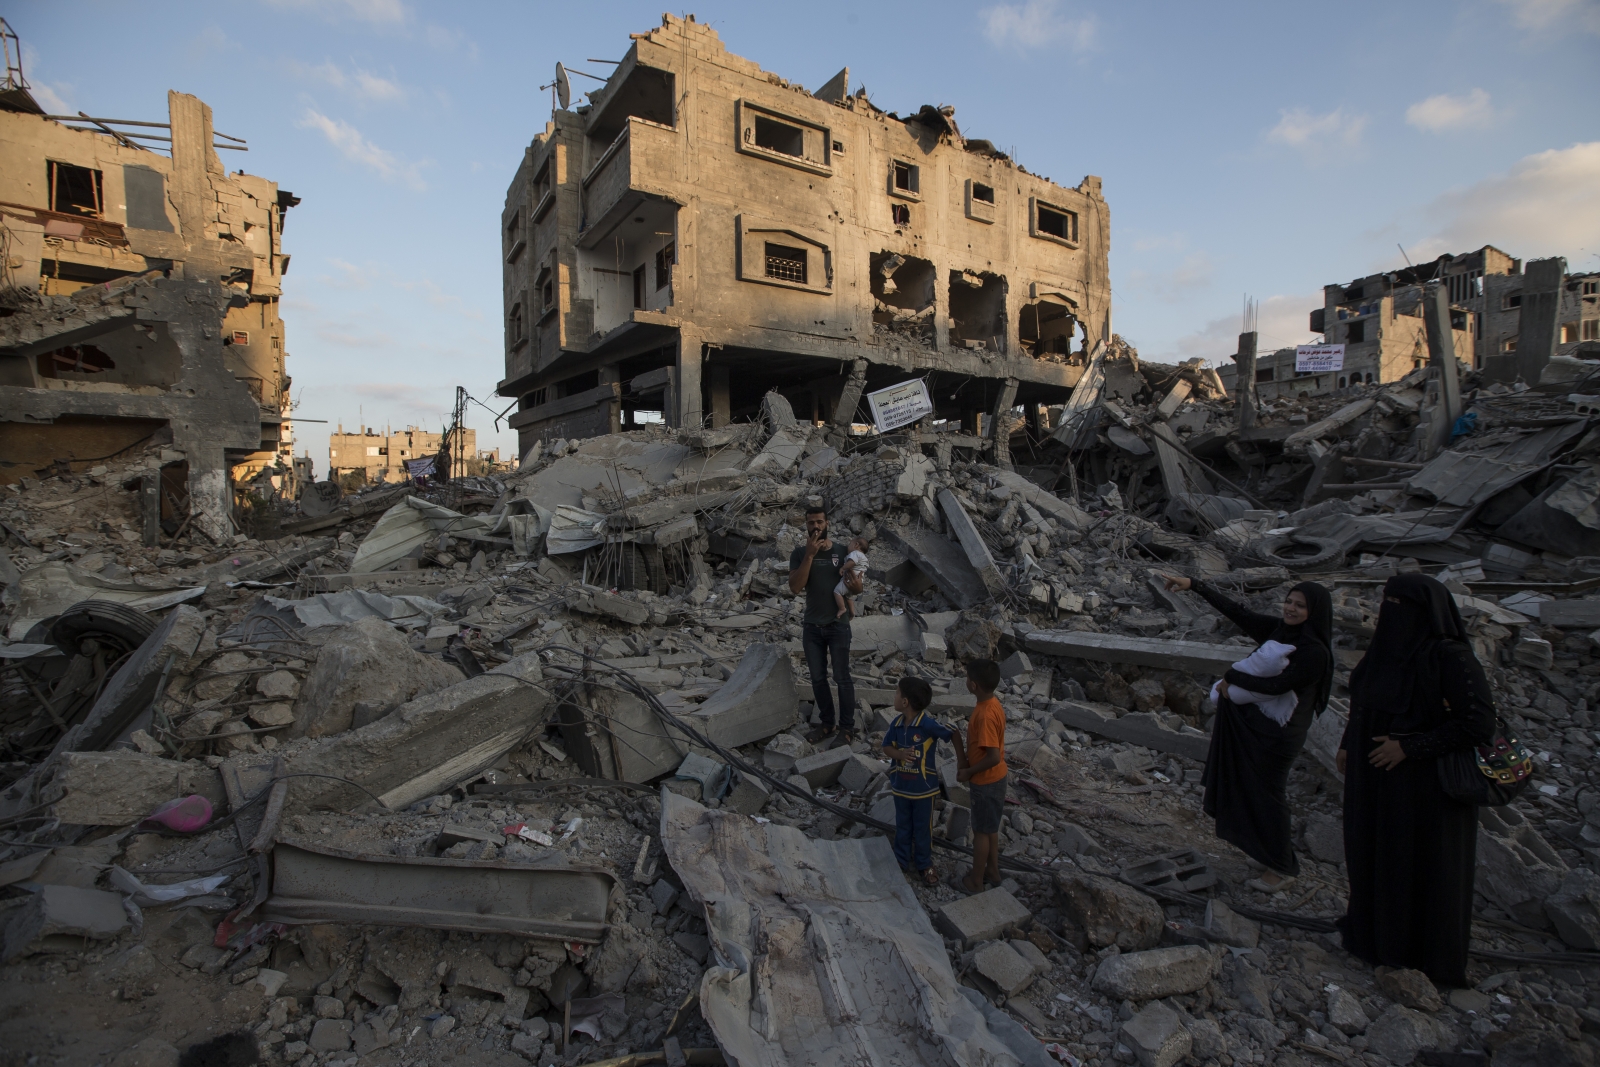 Gaza could be uninhabitable by 2020, claims new UN report